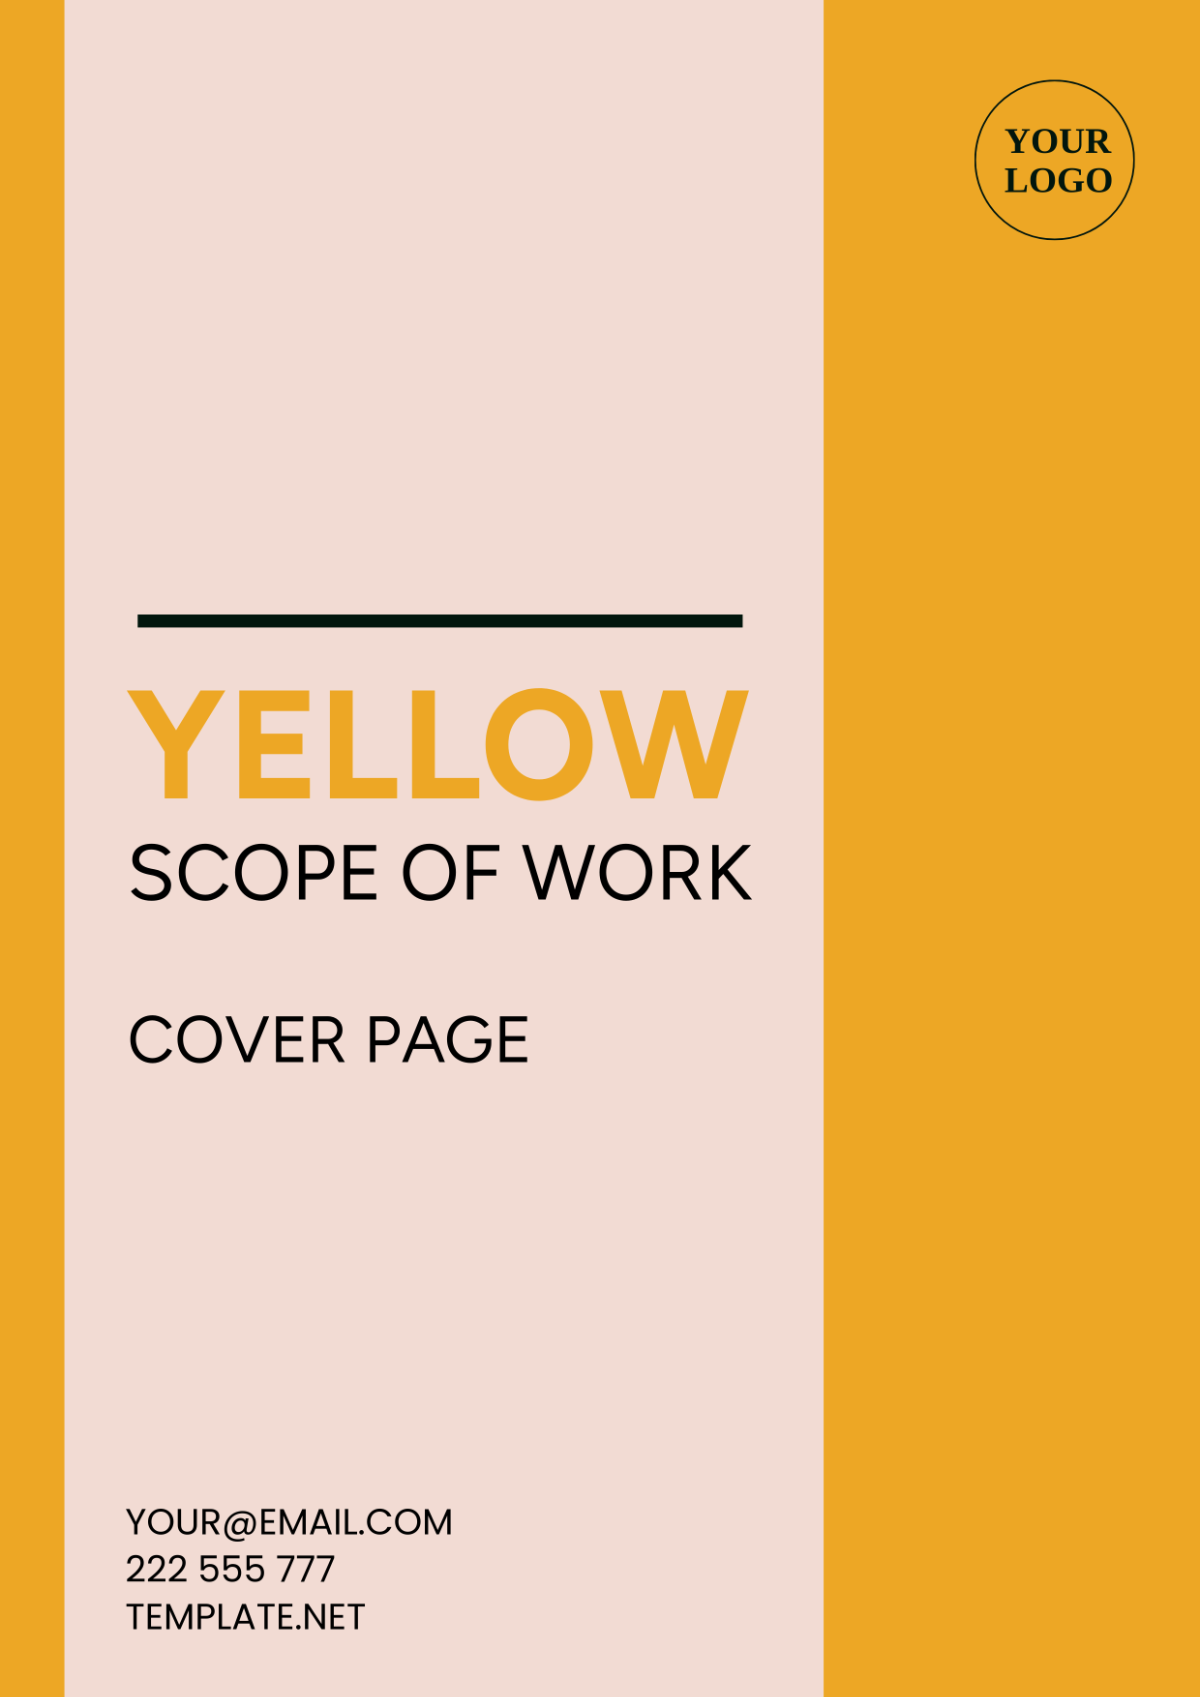 Yellow Scope of Work Cover Page Template